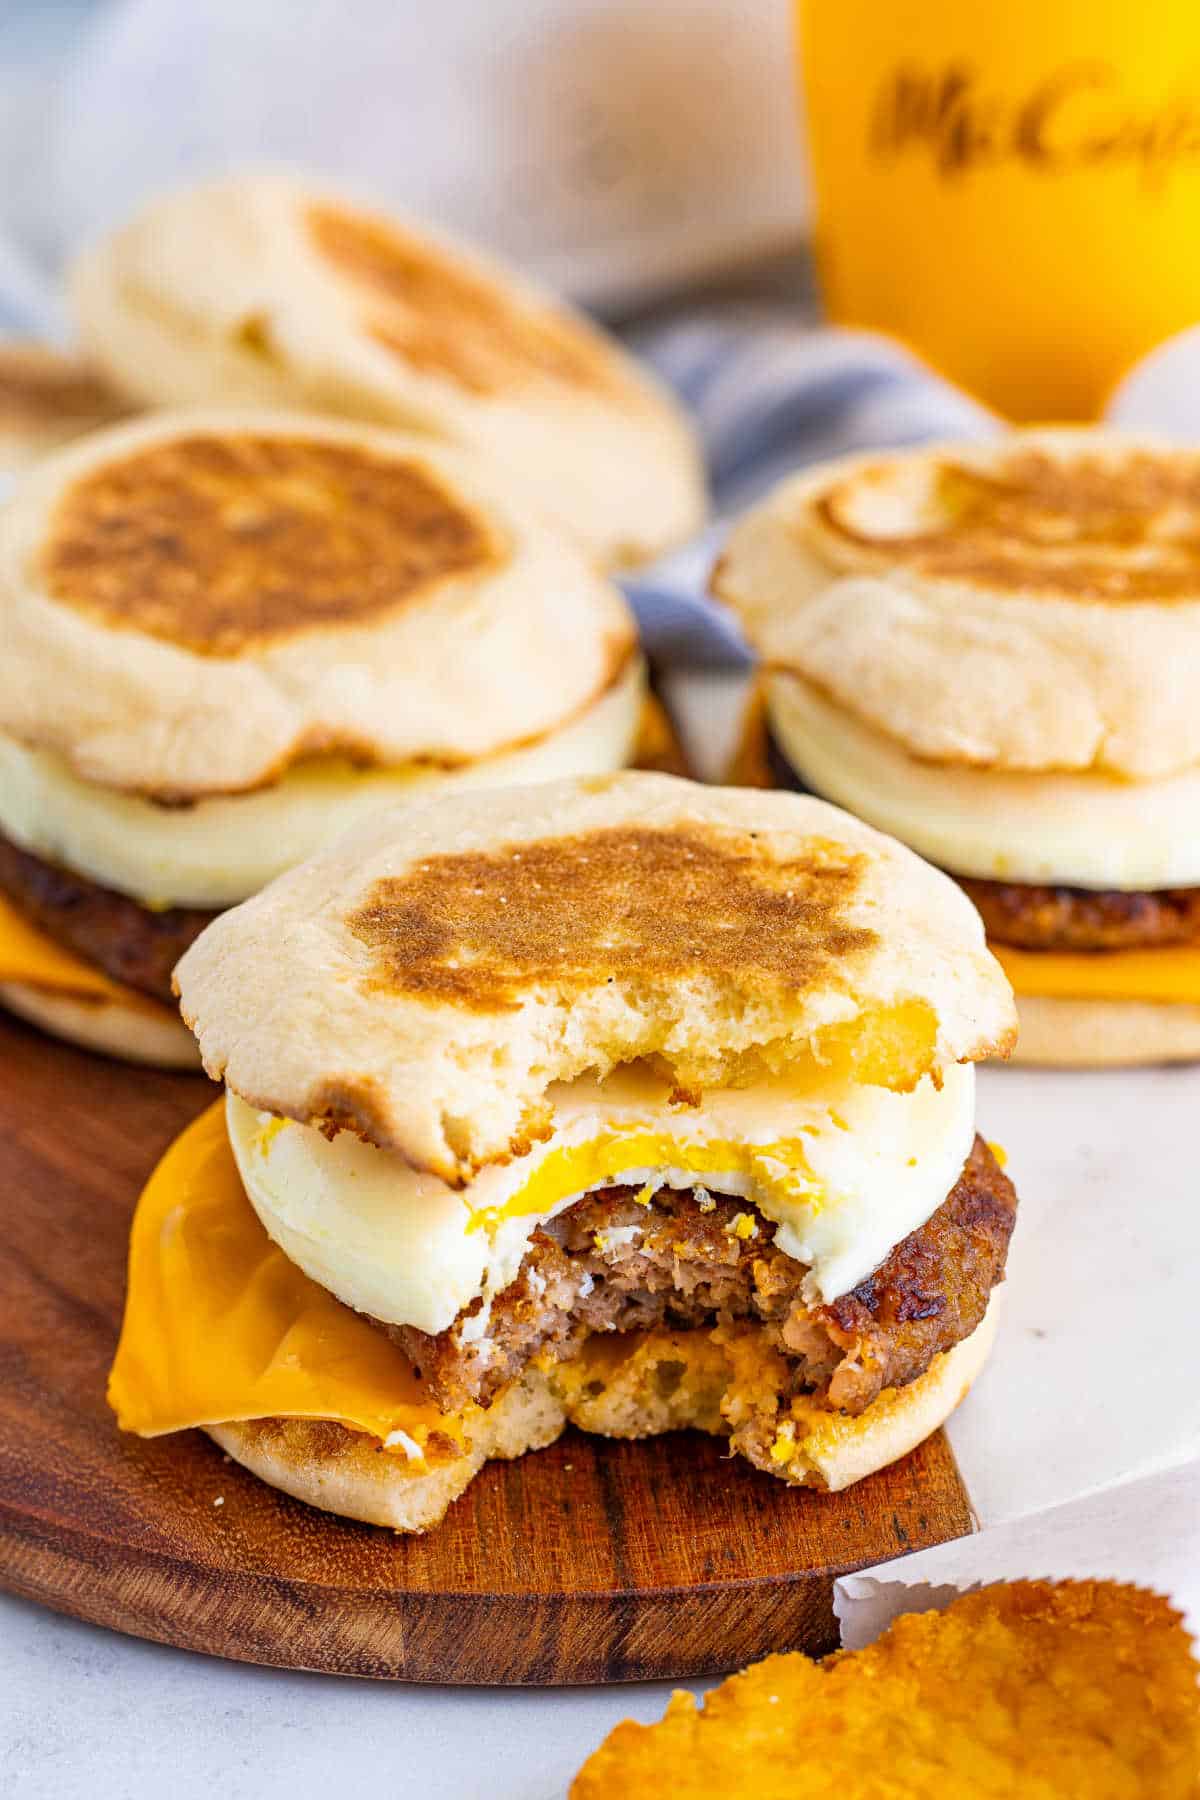 A copycat McDonald's Sausage Egg McMuffin with a bite out of it.